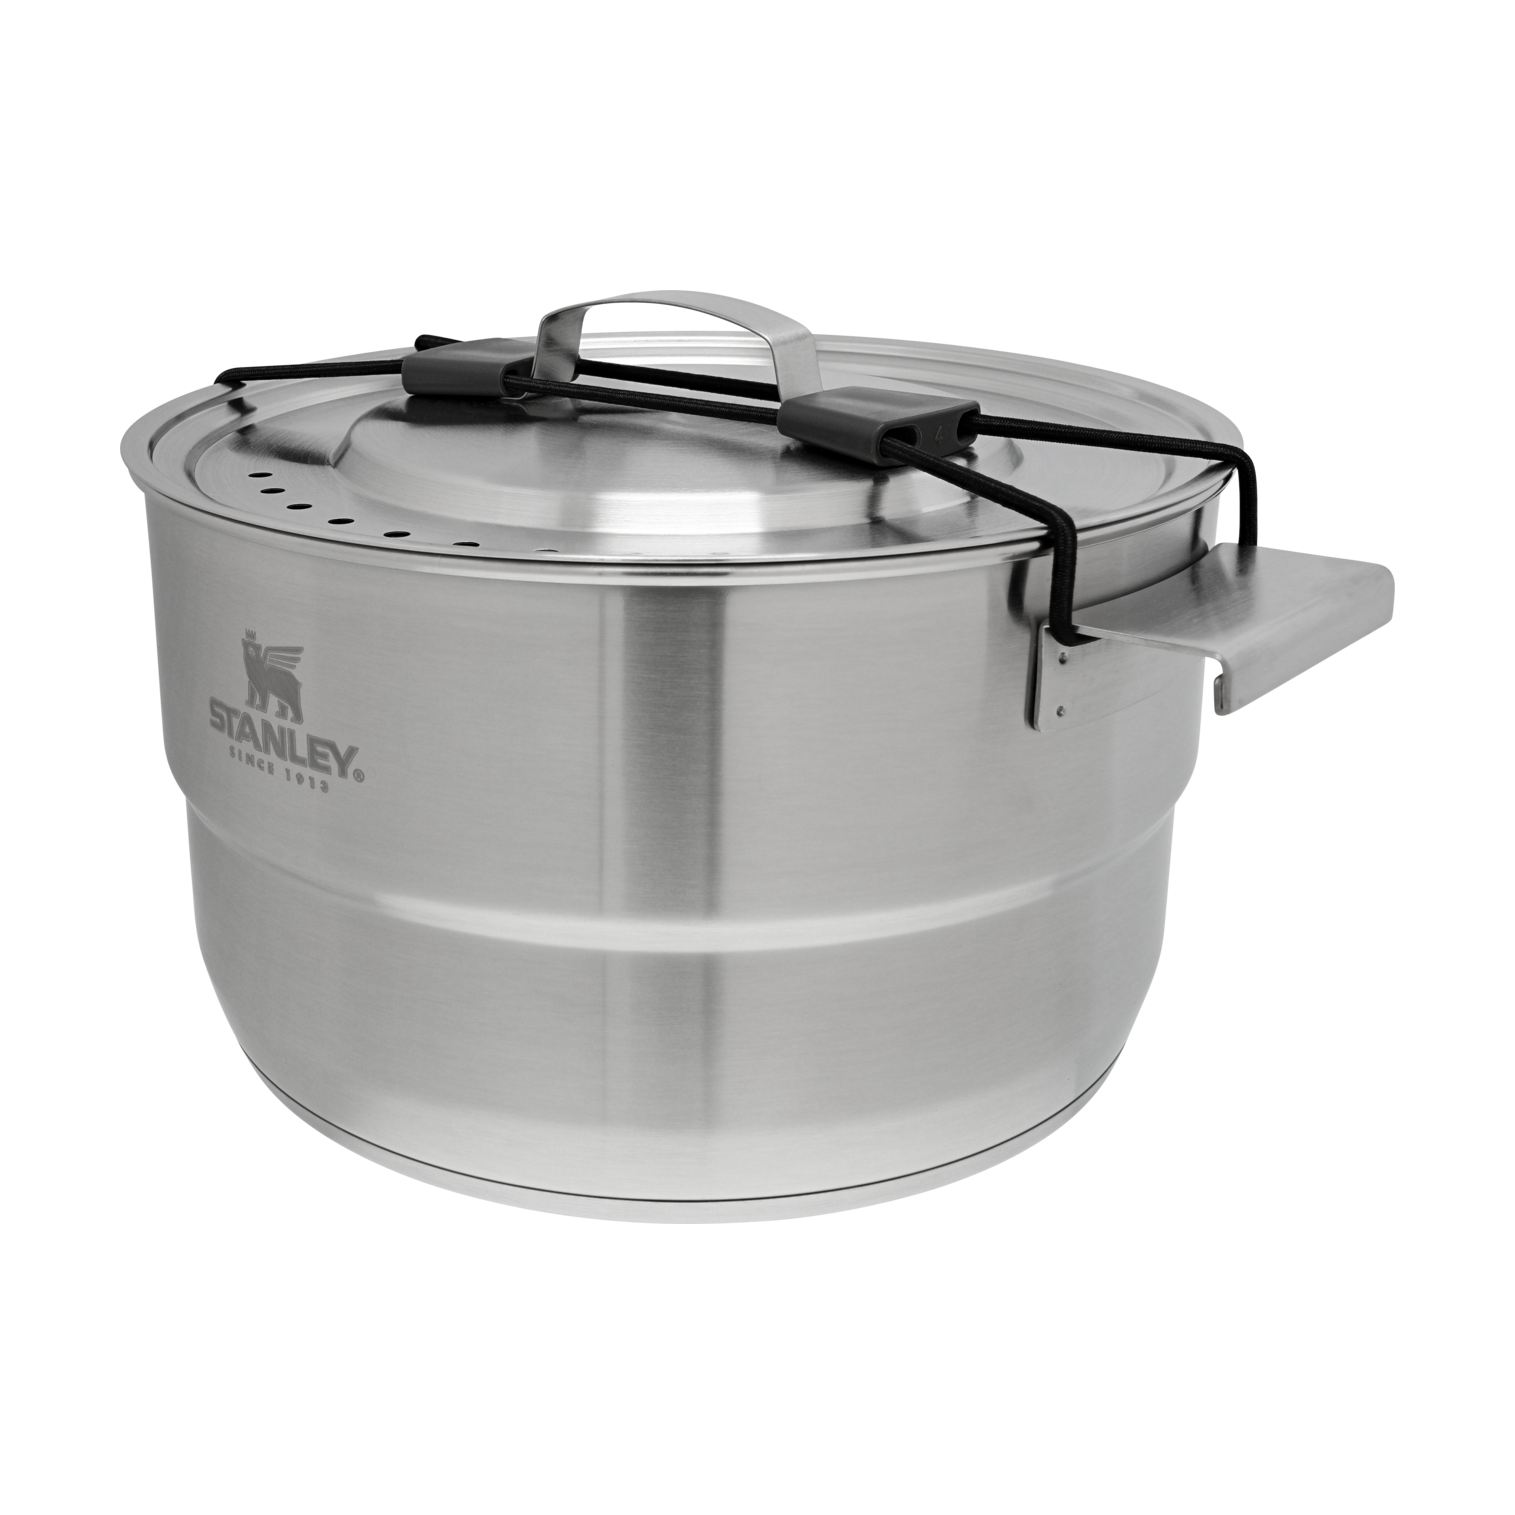 Adventure Even-Heat Camp Pro Cookset: Stainless